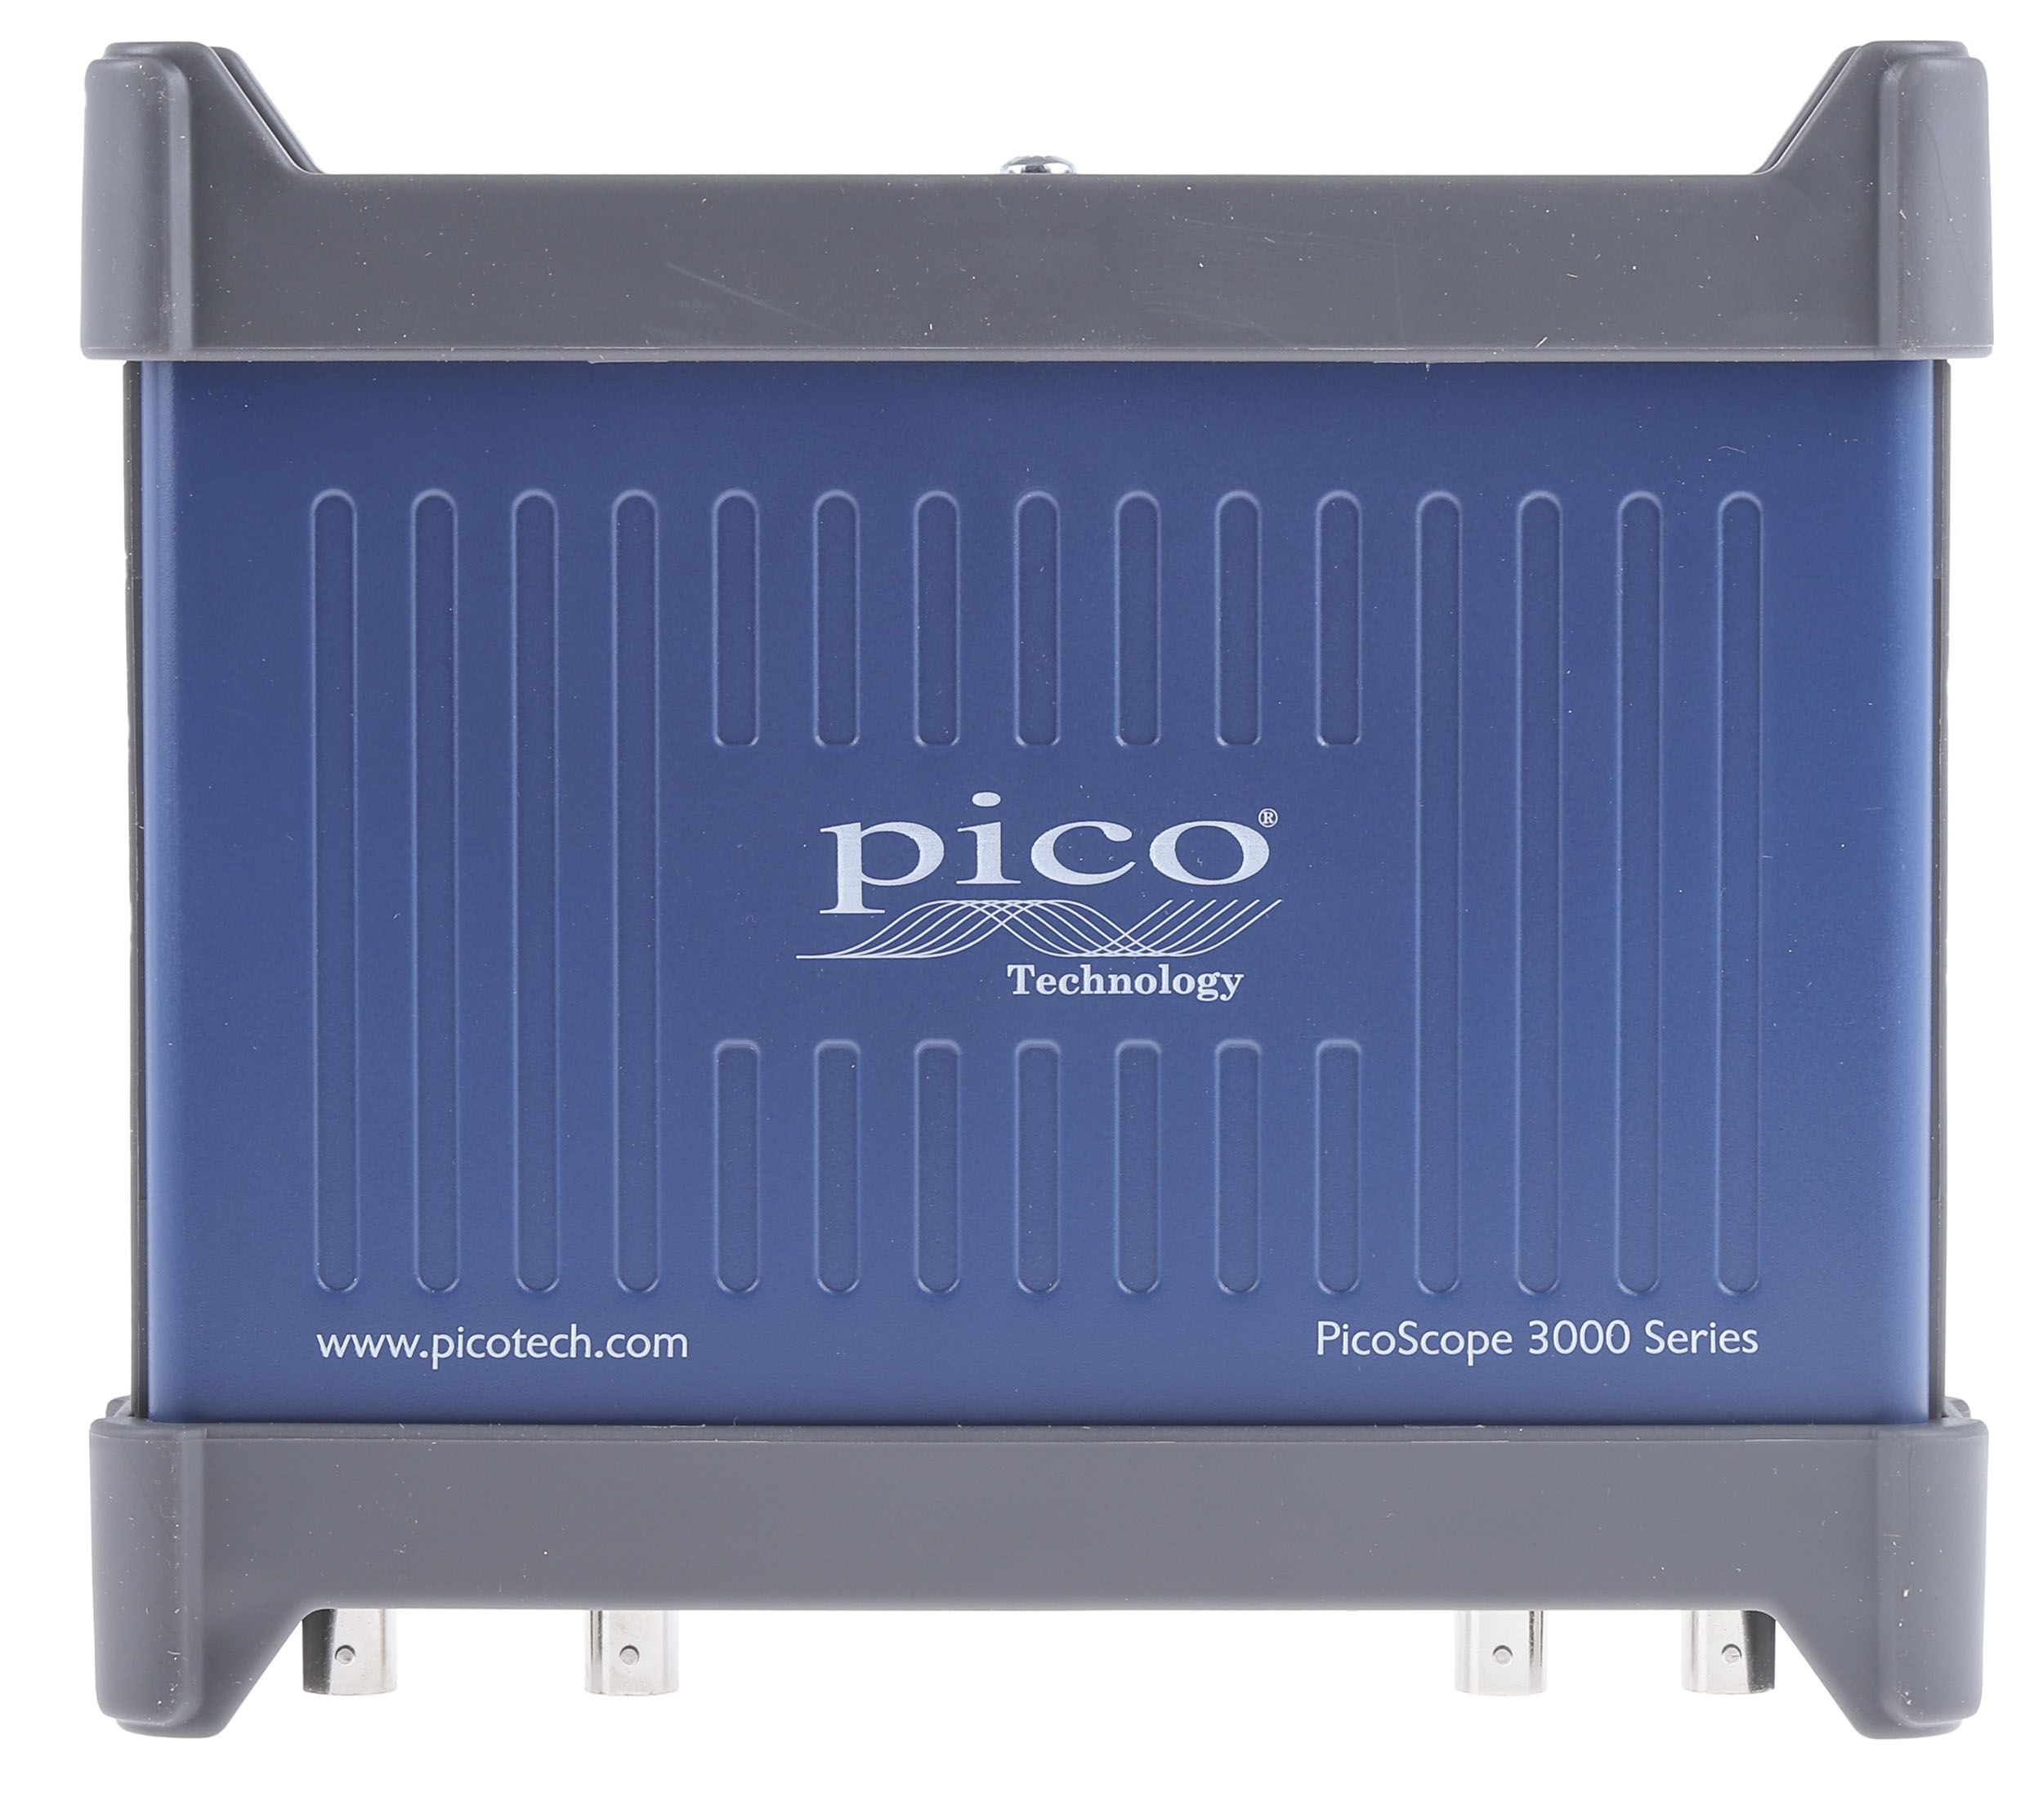 Pico Technology 3203D PC Based Oscilloscope, 50MHz, 2 Analogue Channels